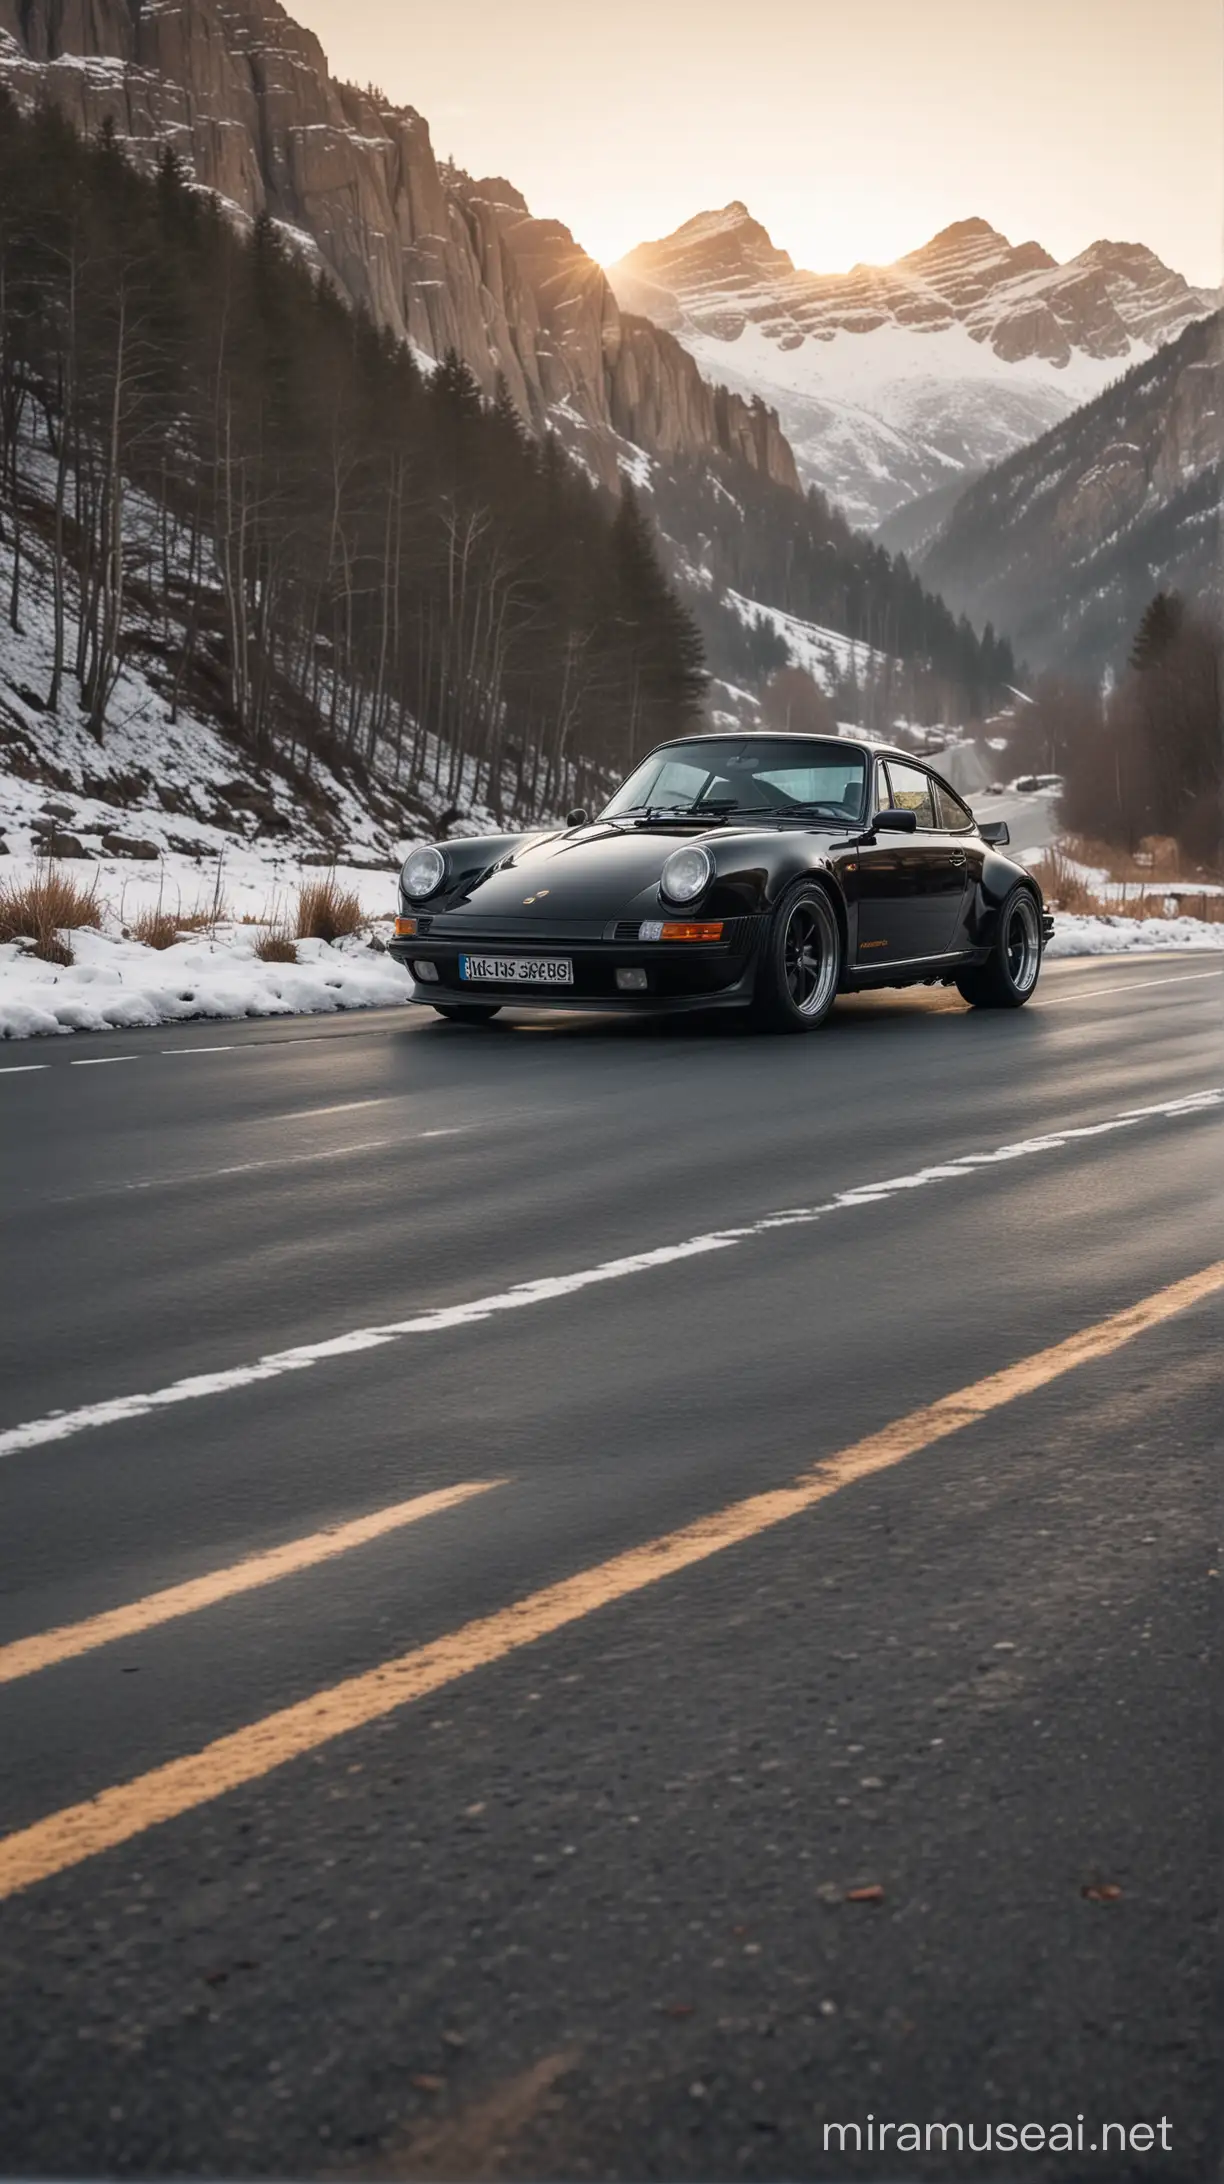 A glossy-black Porsche singer stops on an empty road, the front wheels slightly turned right. A mountain with snow covering its summit as the background. Taken from the back of the car, using Canon EOS 5D Mark IV under bright soft natural sunset light